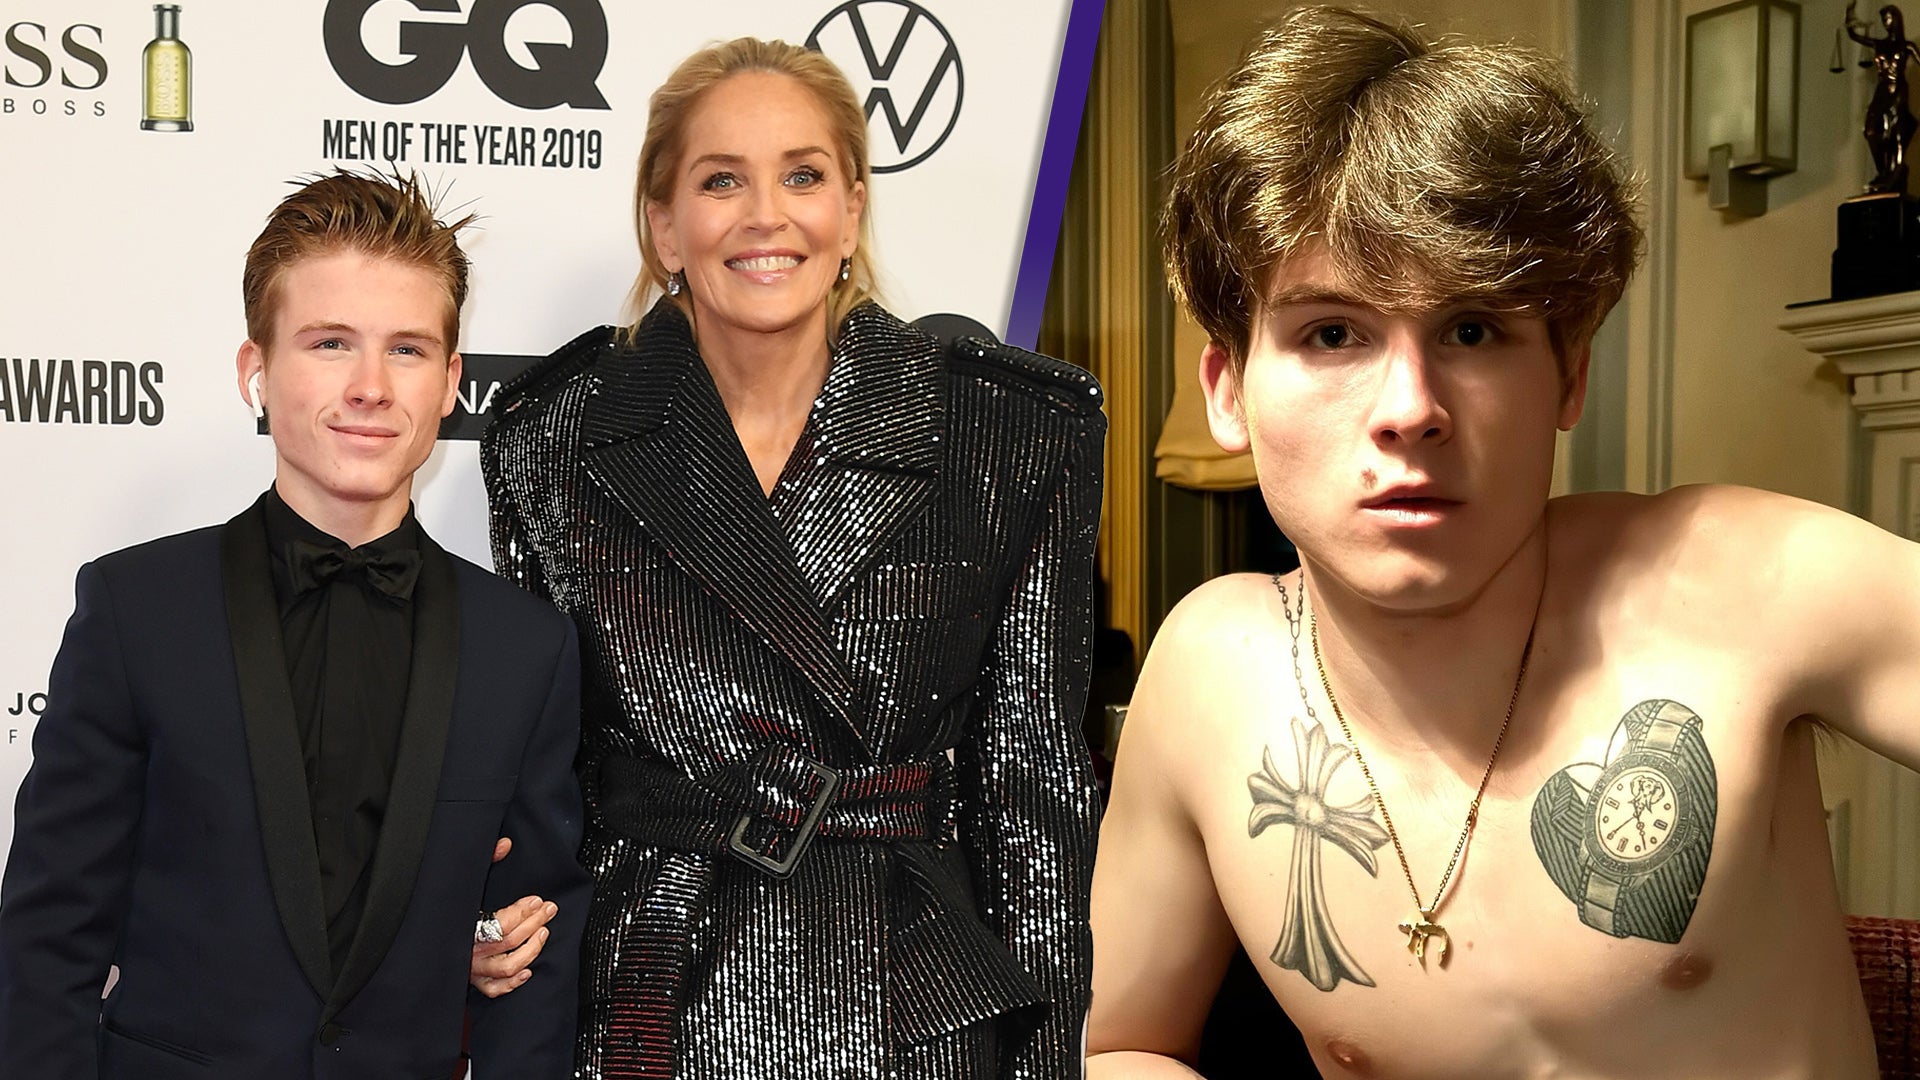 Sharon Stone Shares Rare Look at 23-Year-Old Son Roan